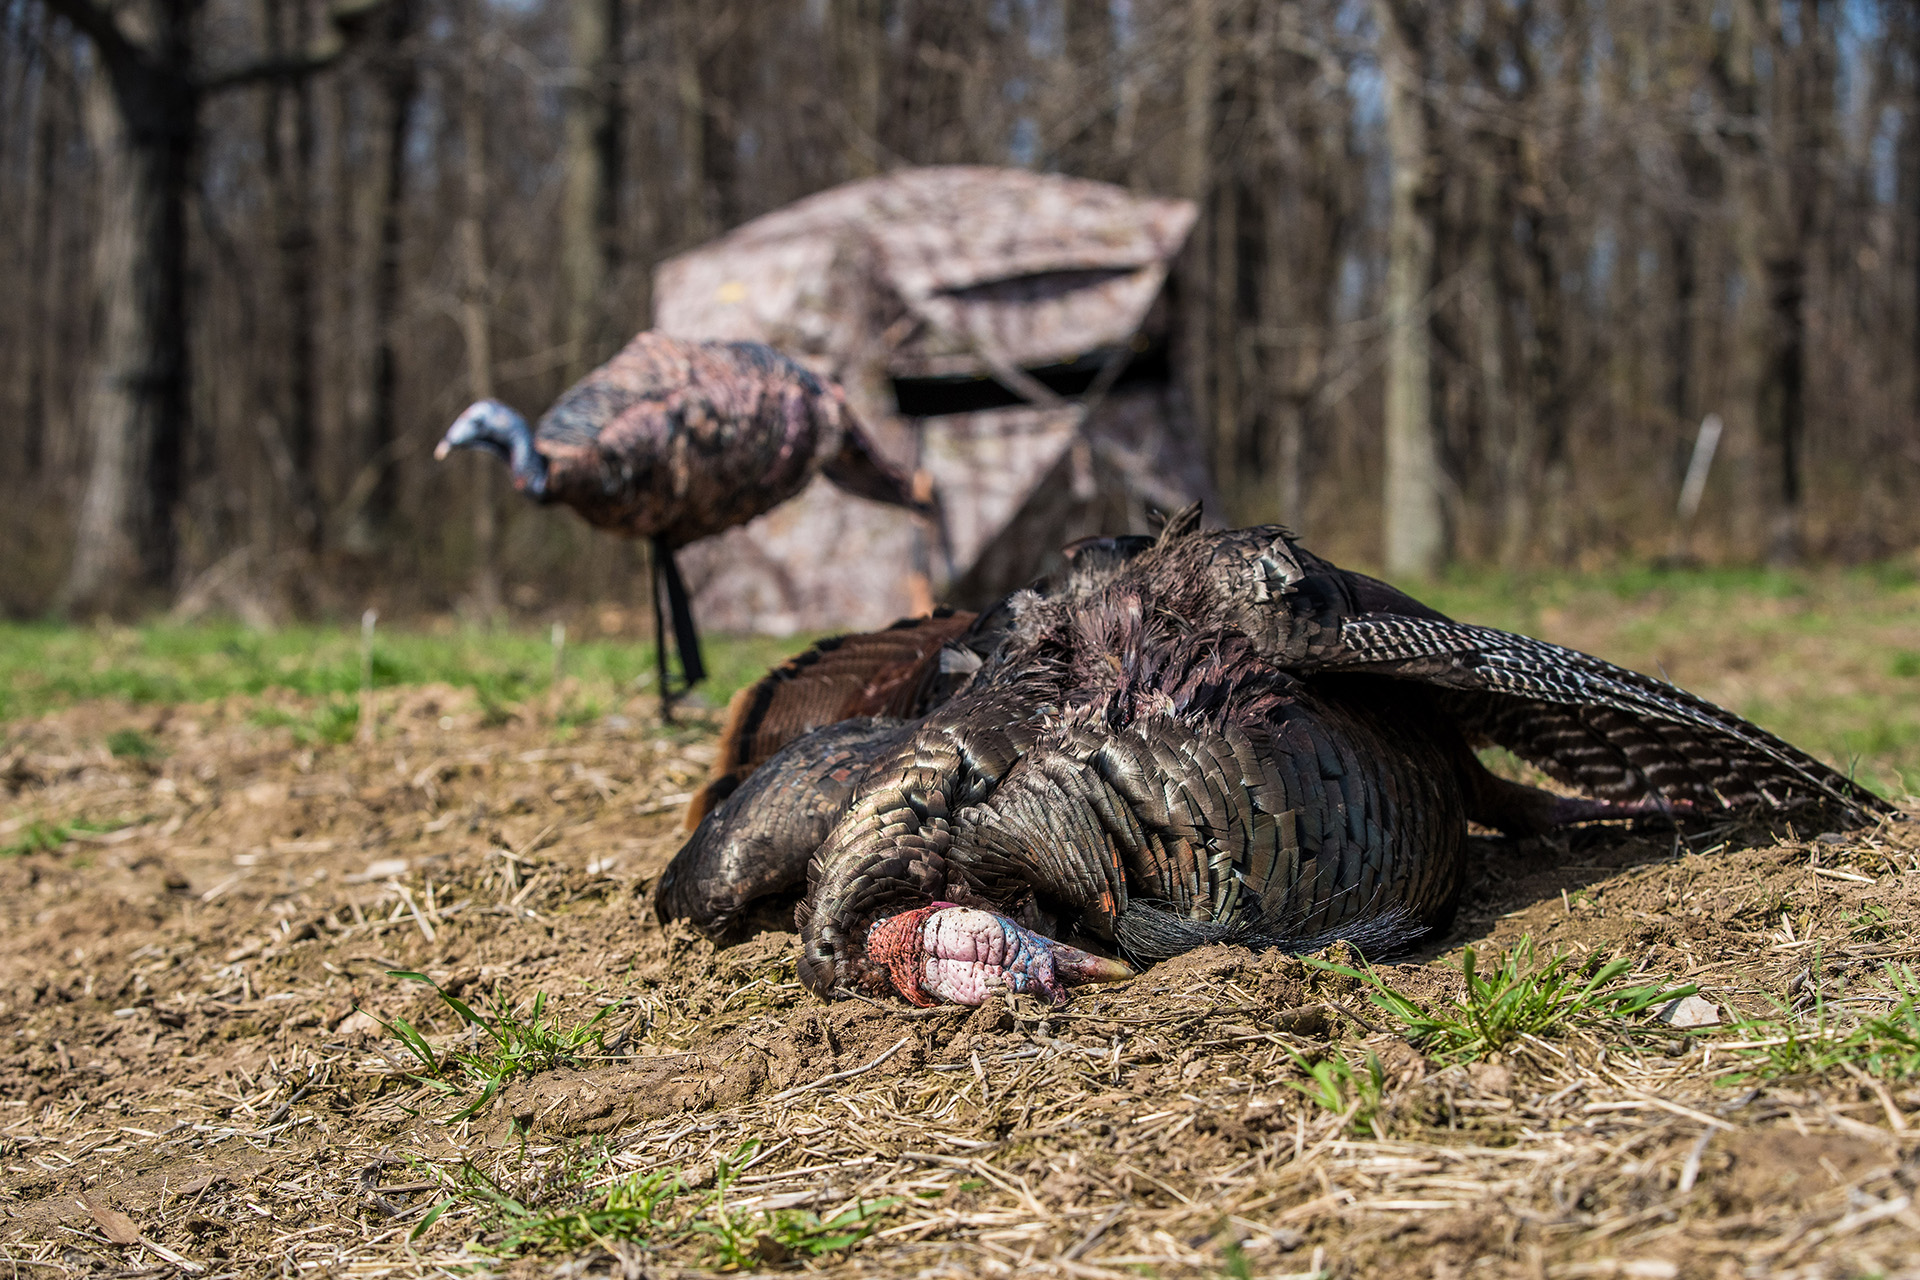 With its range extending from Kansas to Texas, the Rio Grande subspecies presents a flat land turkey available to hunters on any budget.